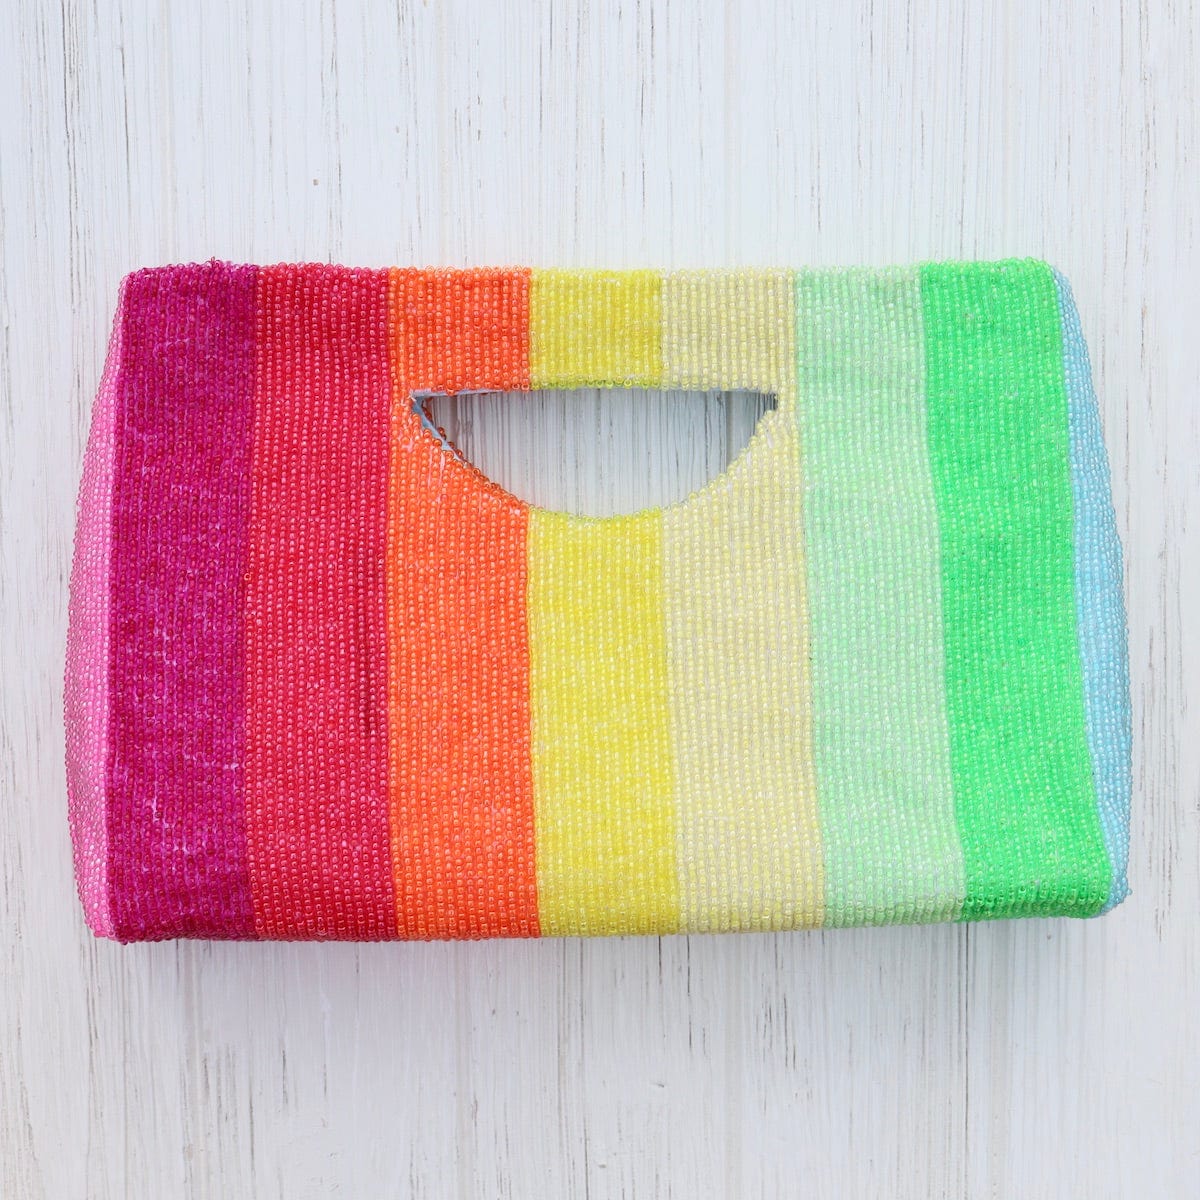 BAG Cut Out Handle Clutch in Neon Rainbow Stripes